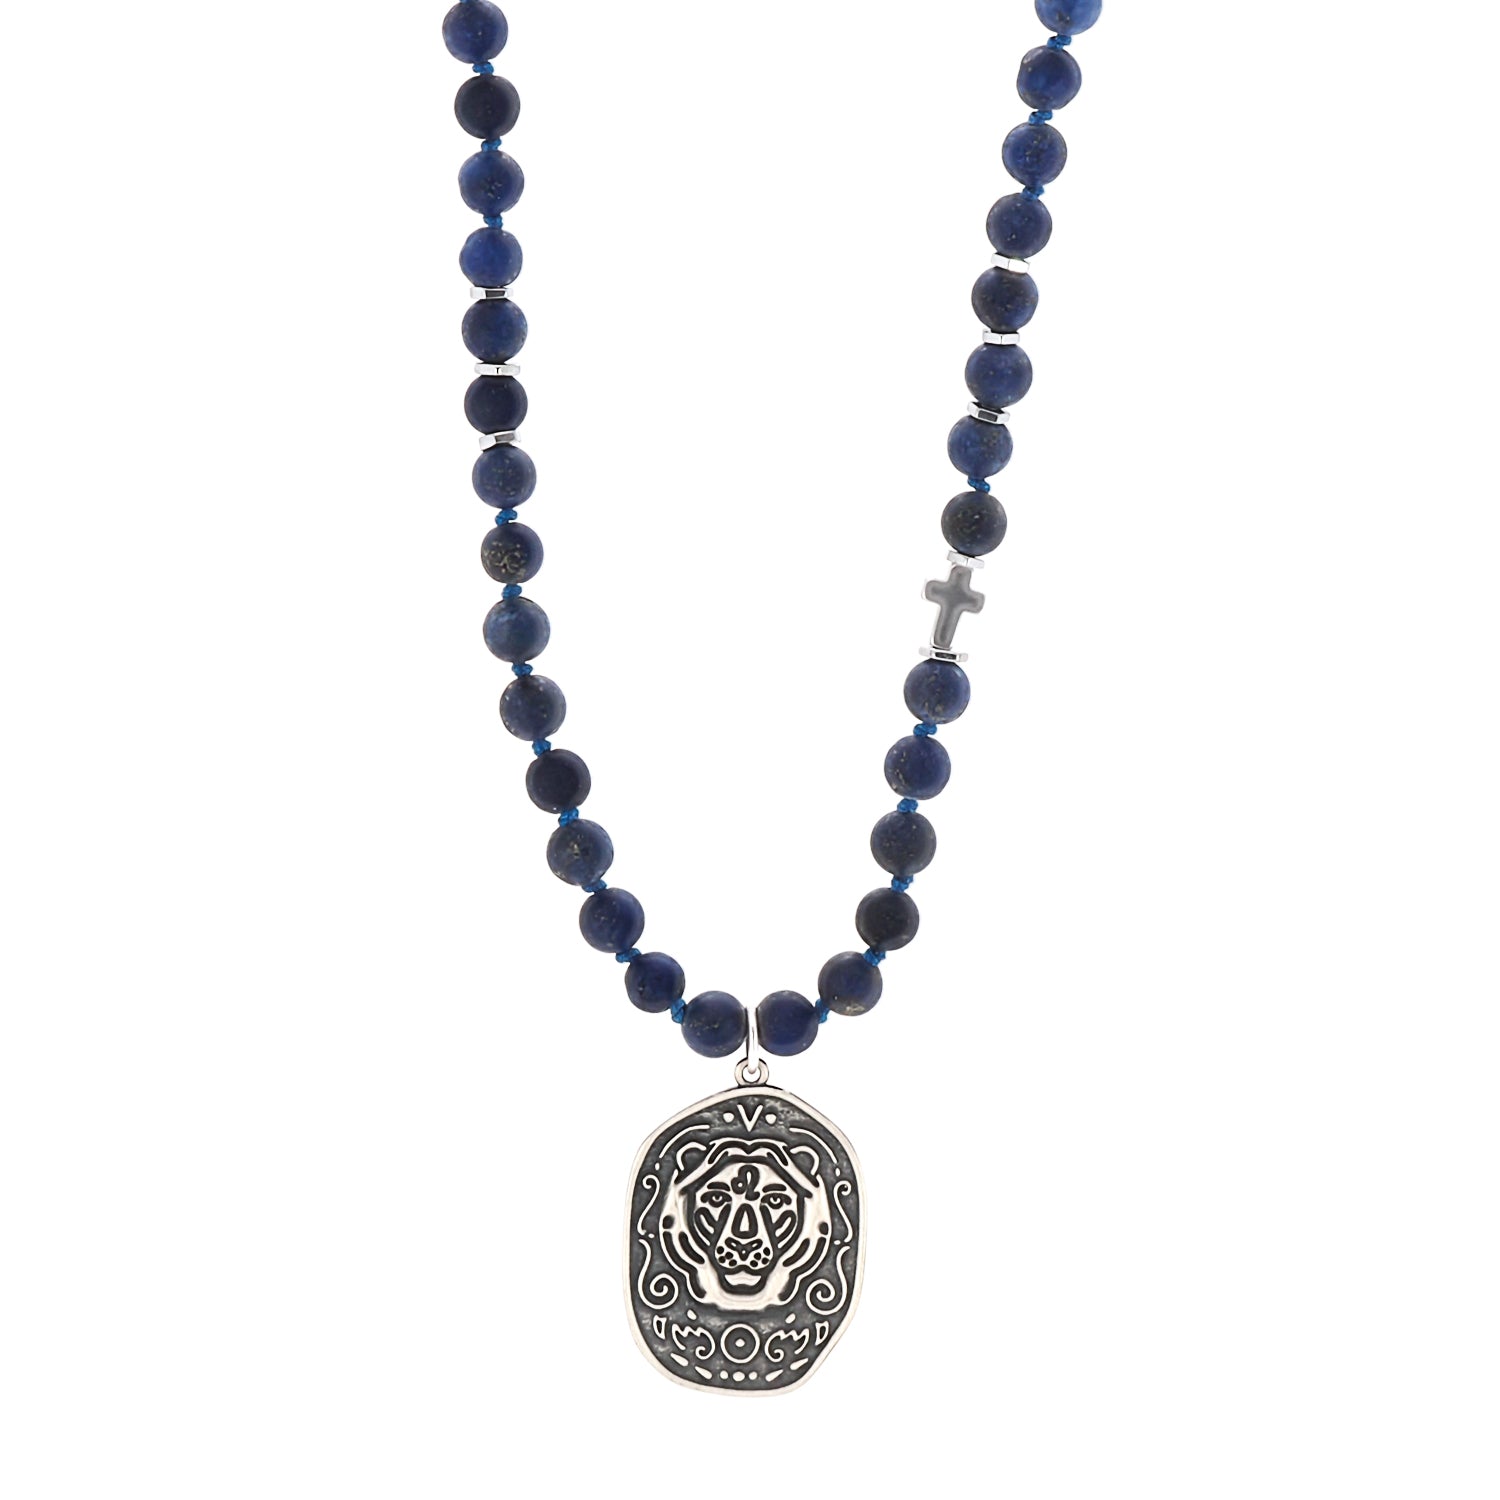 Discover the beauty and symbolism of the Spiritual Lapis Lazuli Lion necklace, a handmade jewelry piece crafted with care and attention.